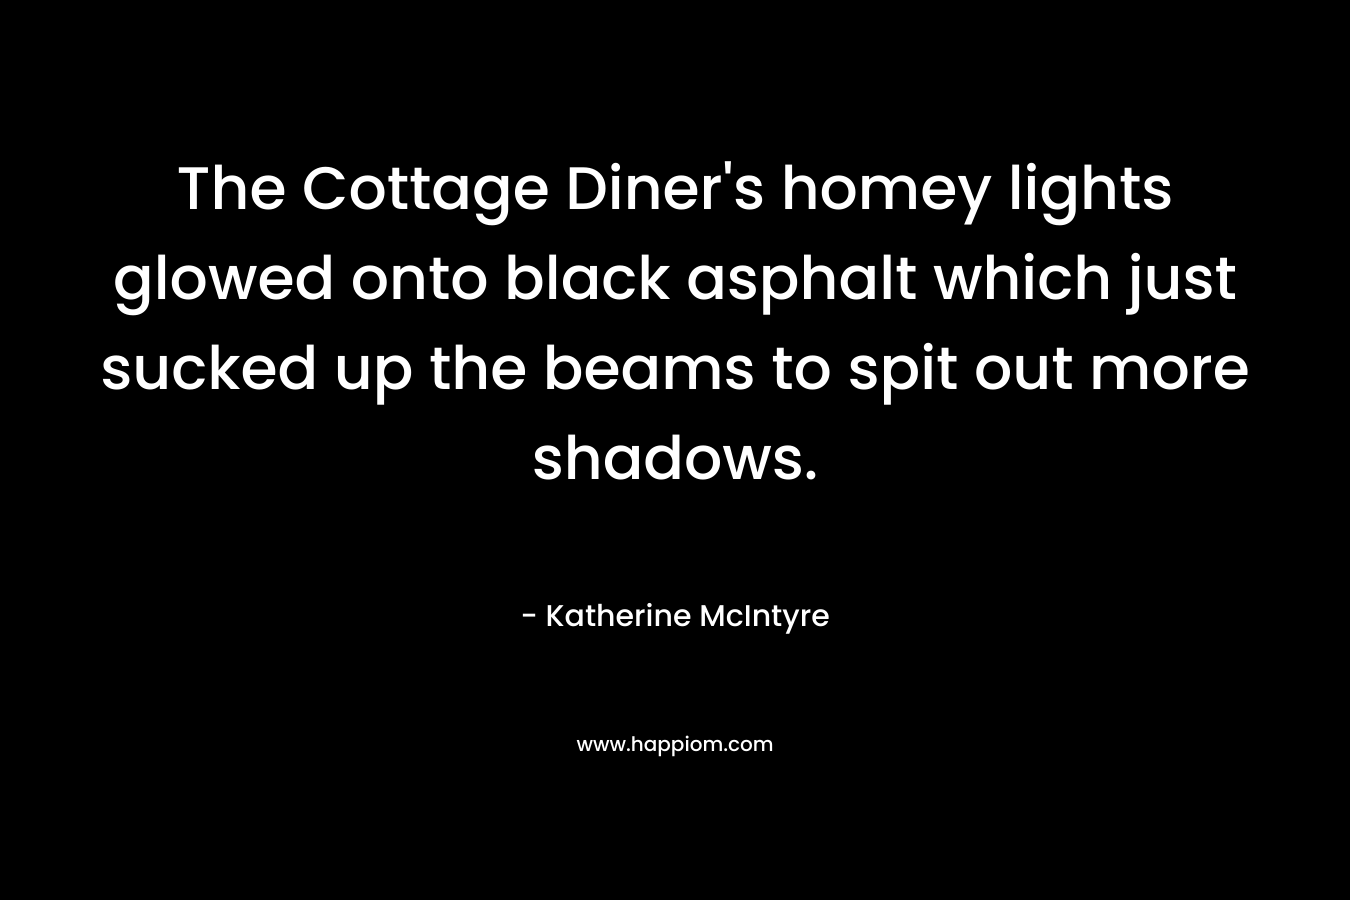 The Cottage Diner’s homey lights glowed onto black asphalt which just sucked up the beams to spit out more shadows. – Katherine McIntyre